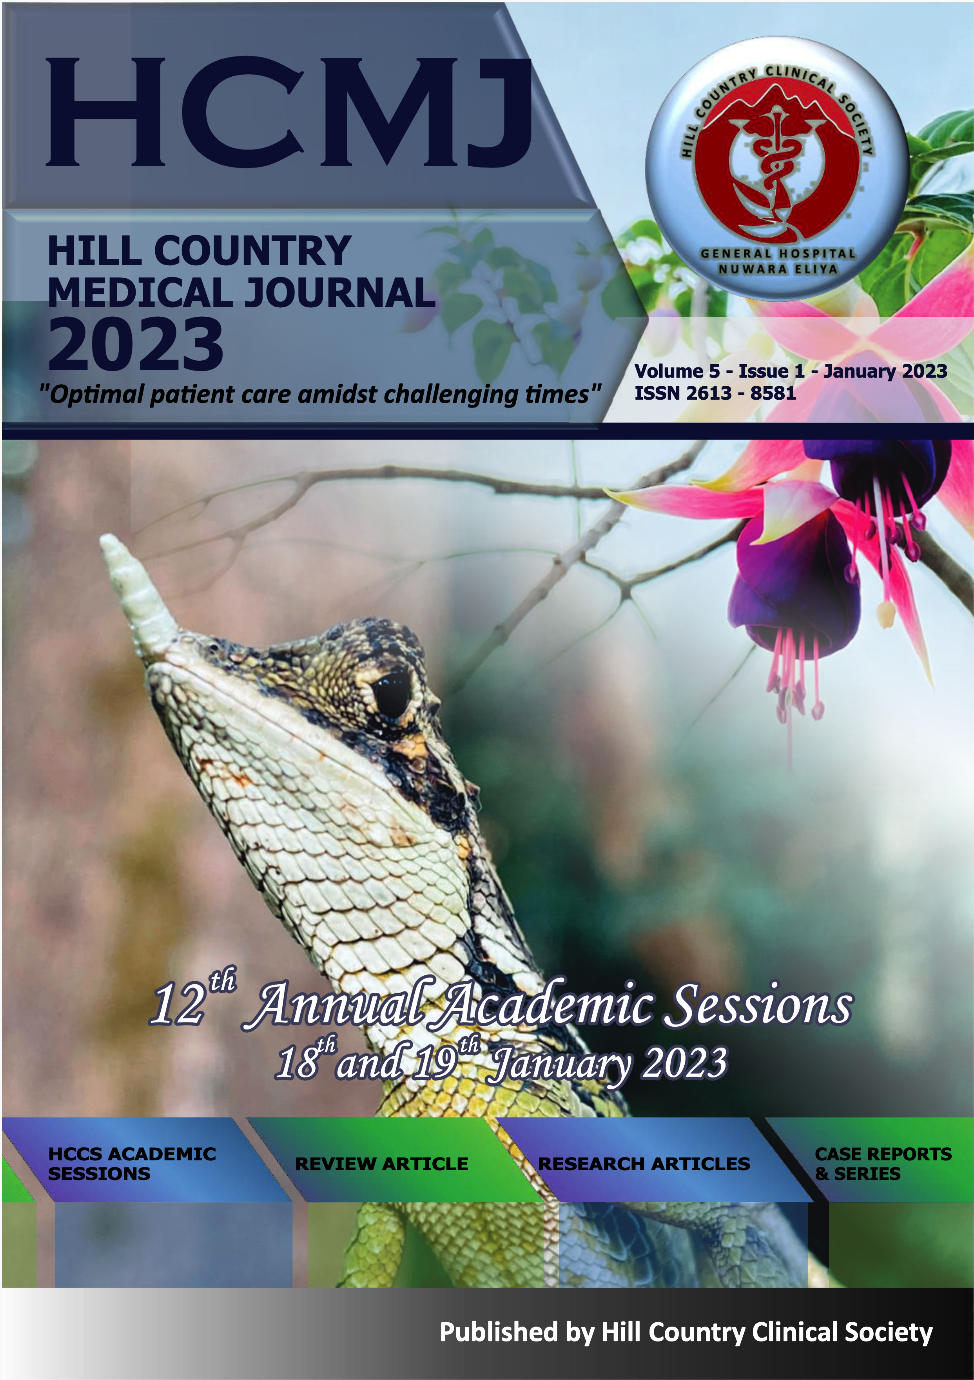 Hill Country Clinical Society Annual Academic Sessions 2023.